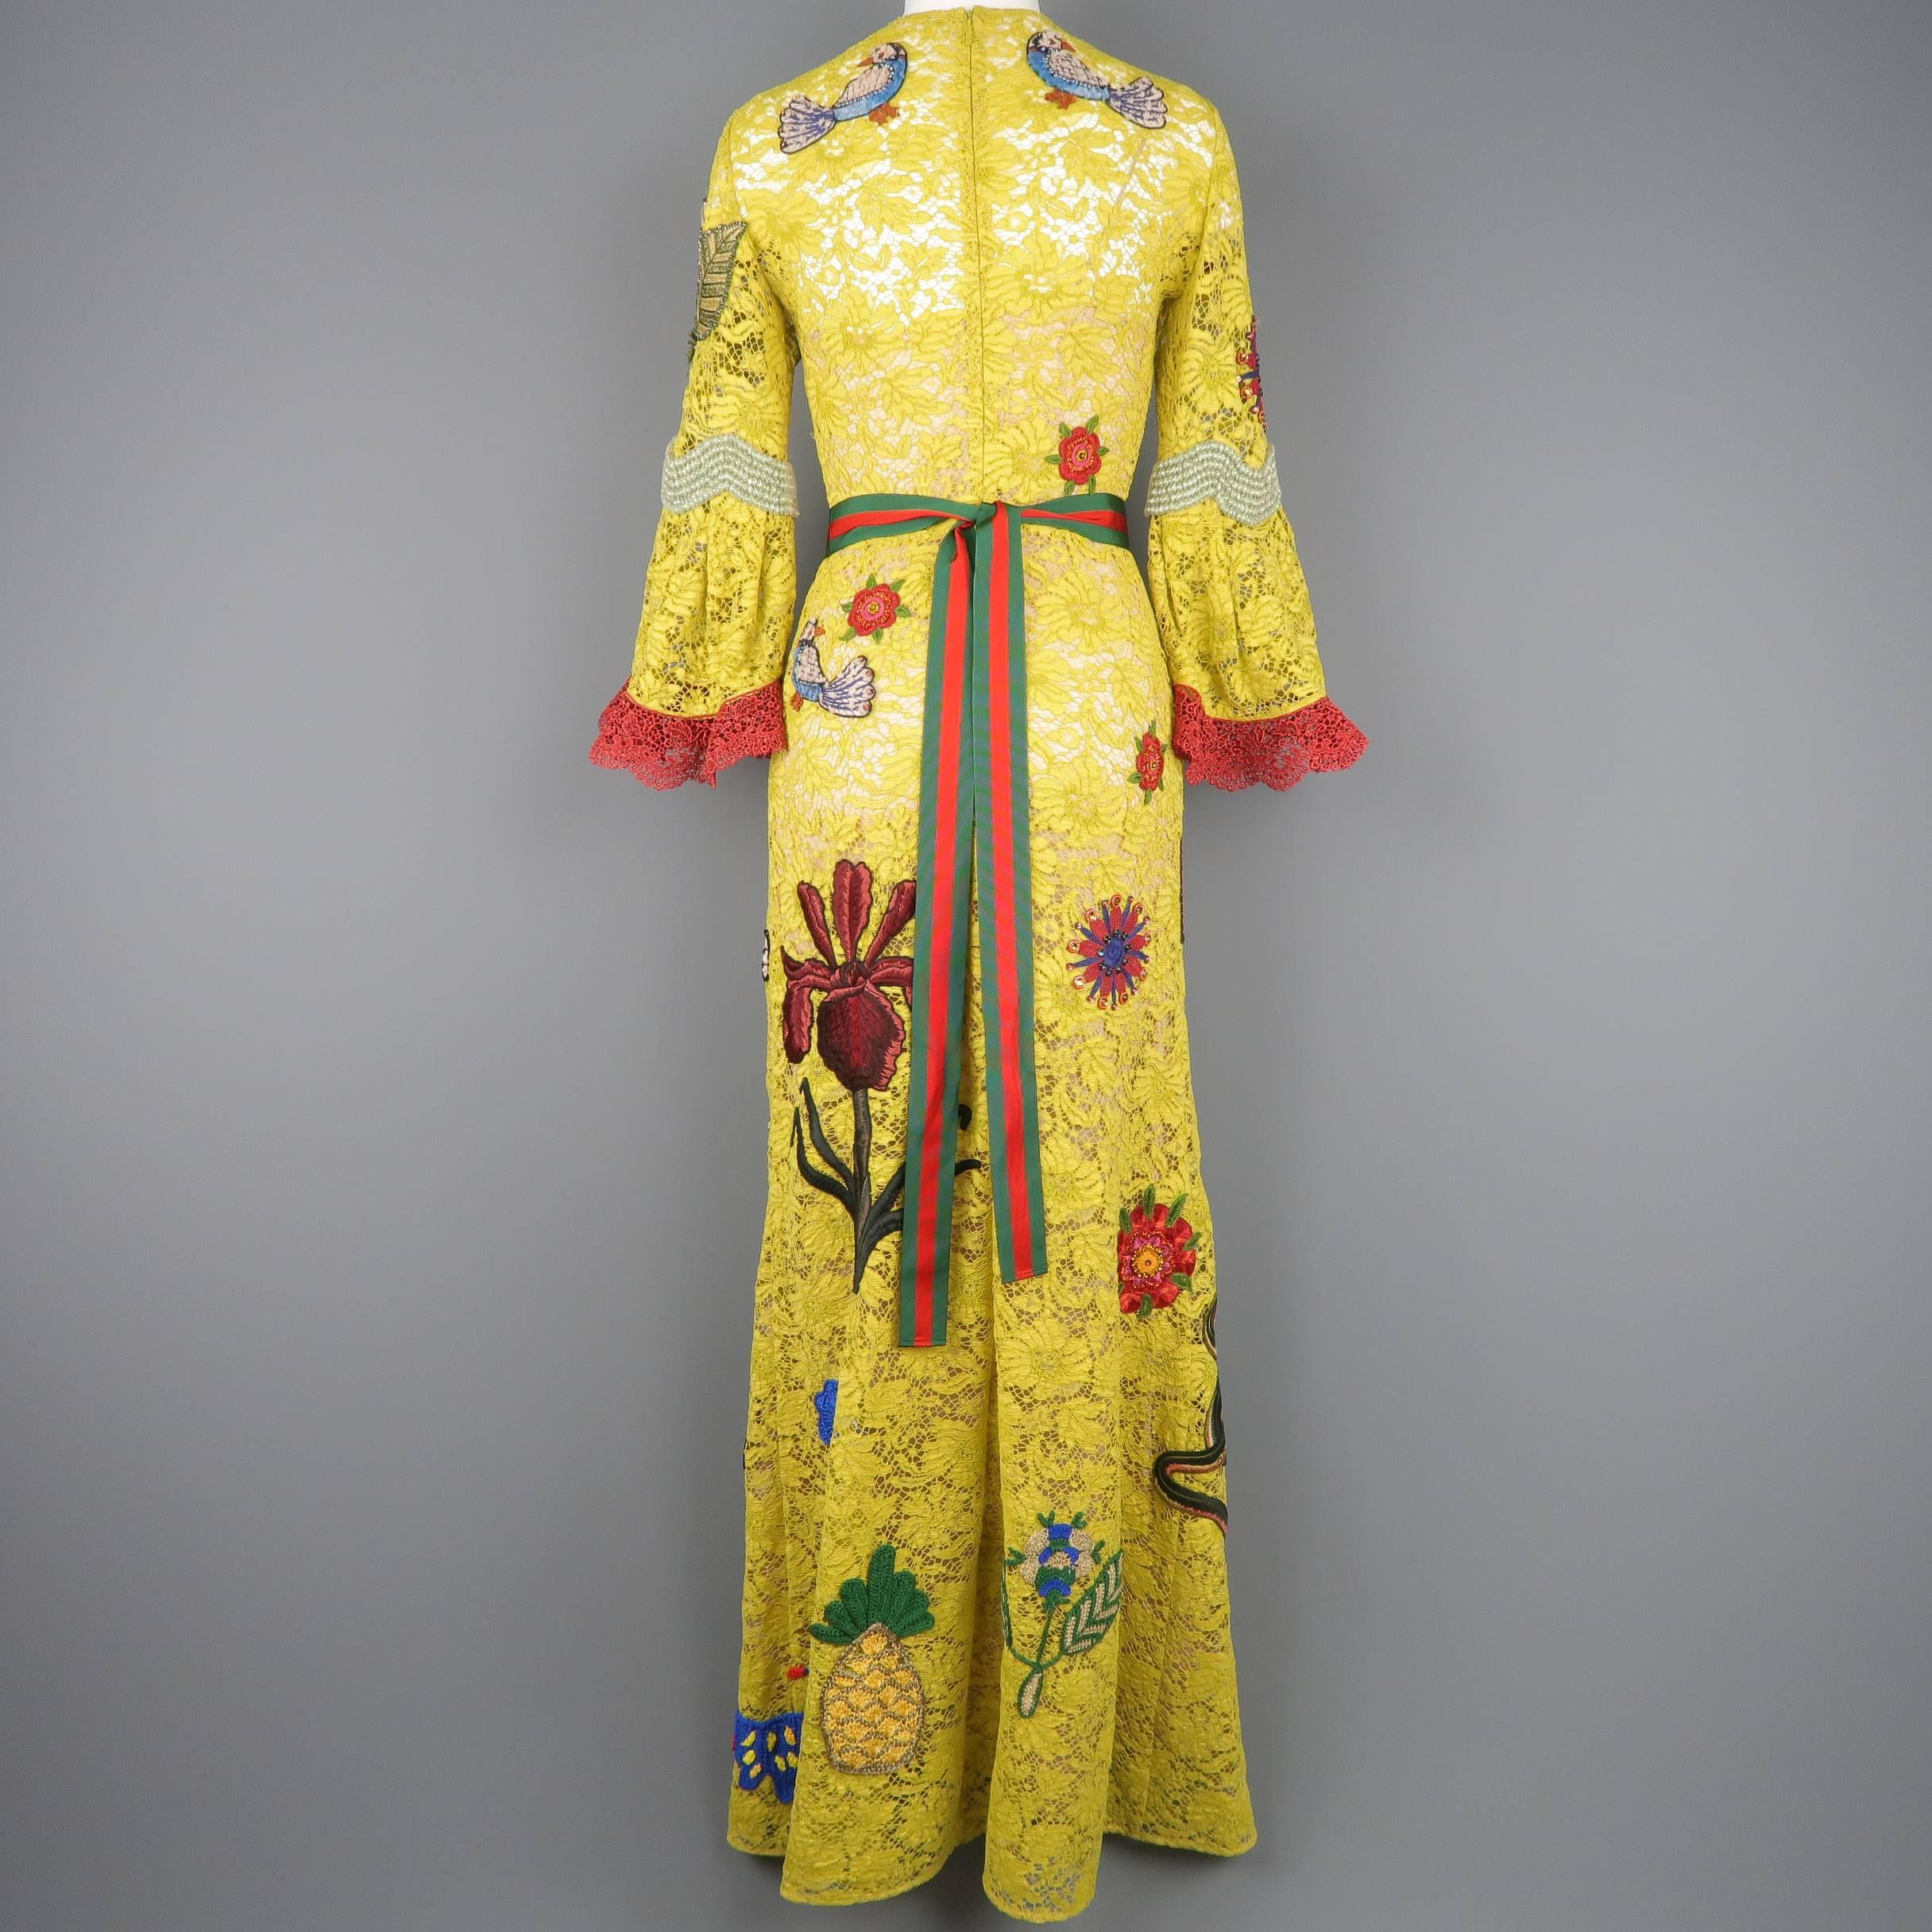 Gucci Yellow Lace Embroidered Runway Dress / Gown, Cruise 2016 - Retail $21, 000 8